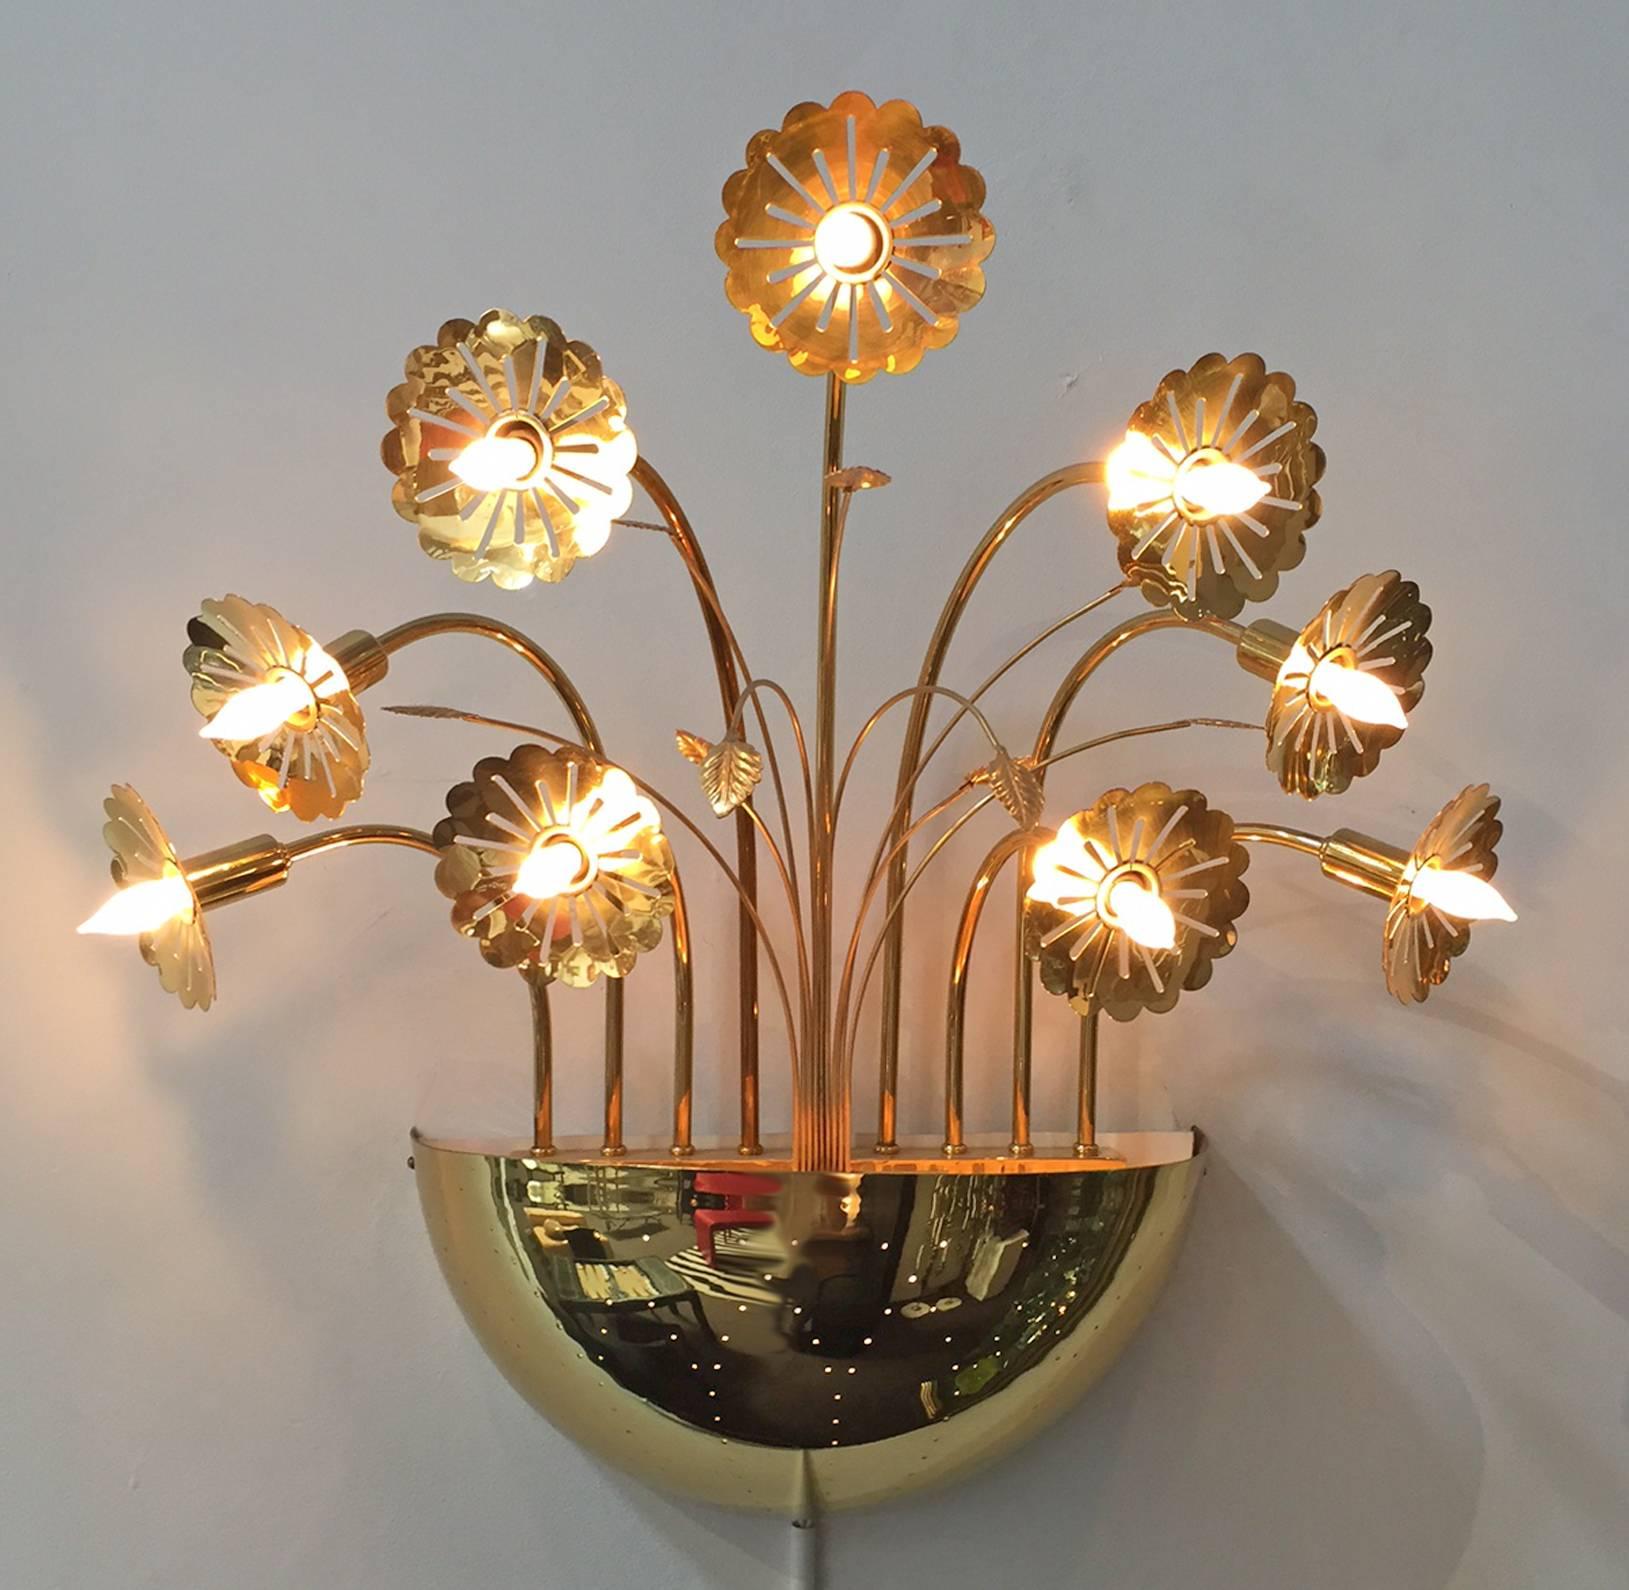 Wall light designed by Finnish modern master of lighting: Paavo Tynell. 
Made of brass with perforated illuminated bowl and nine flowers with bulbs. This is an exceptional piece. The finish has been expertly restored and the wiring is new. Ready